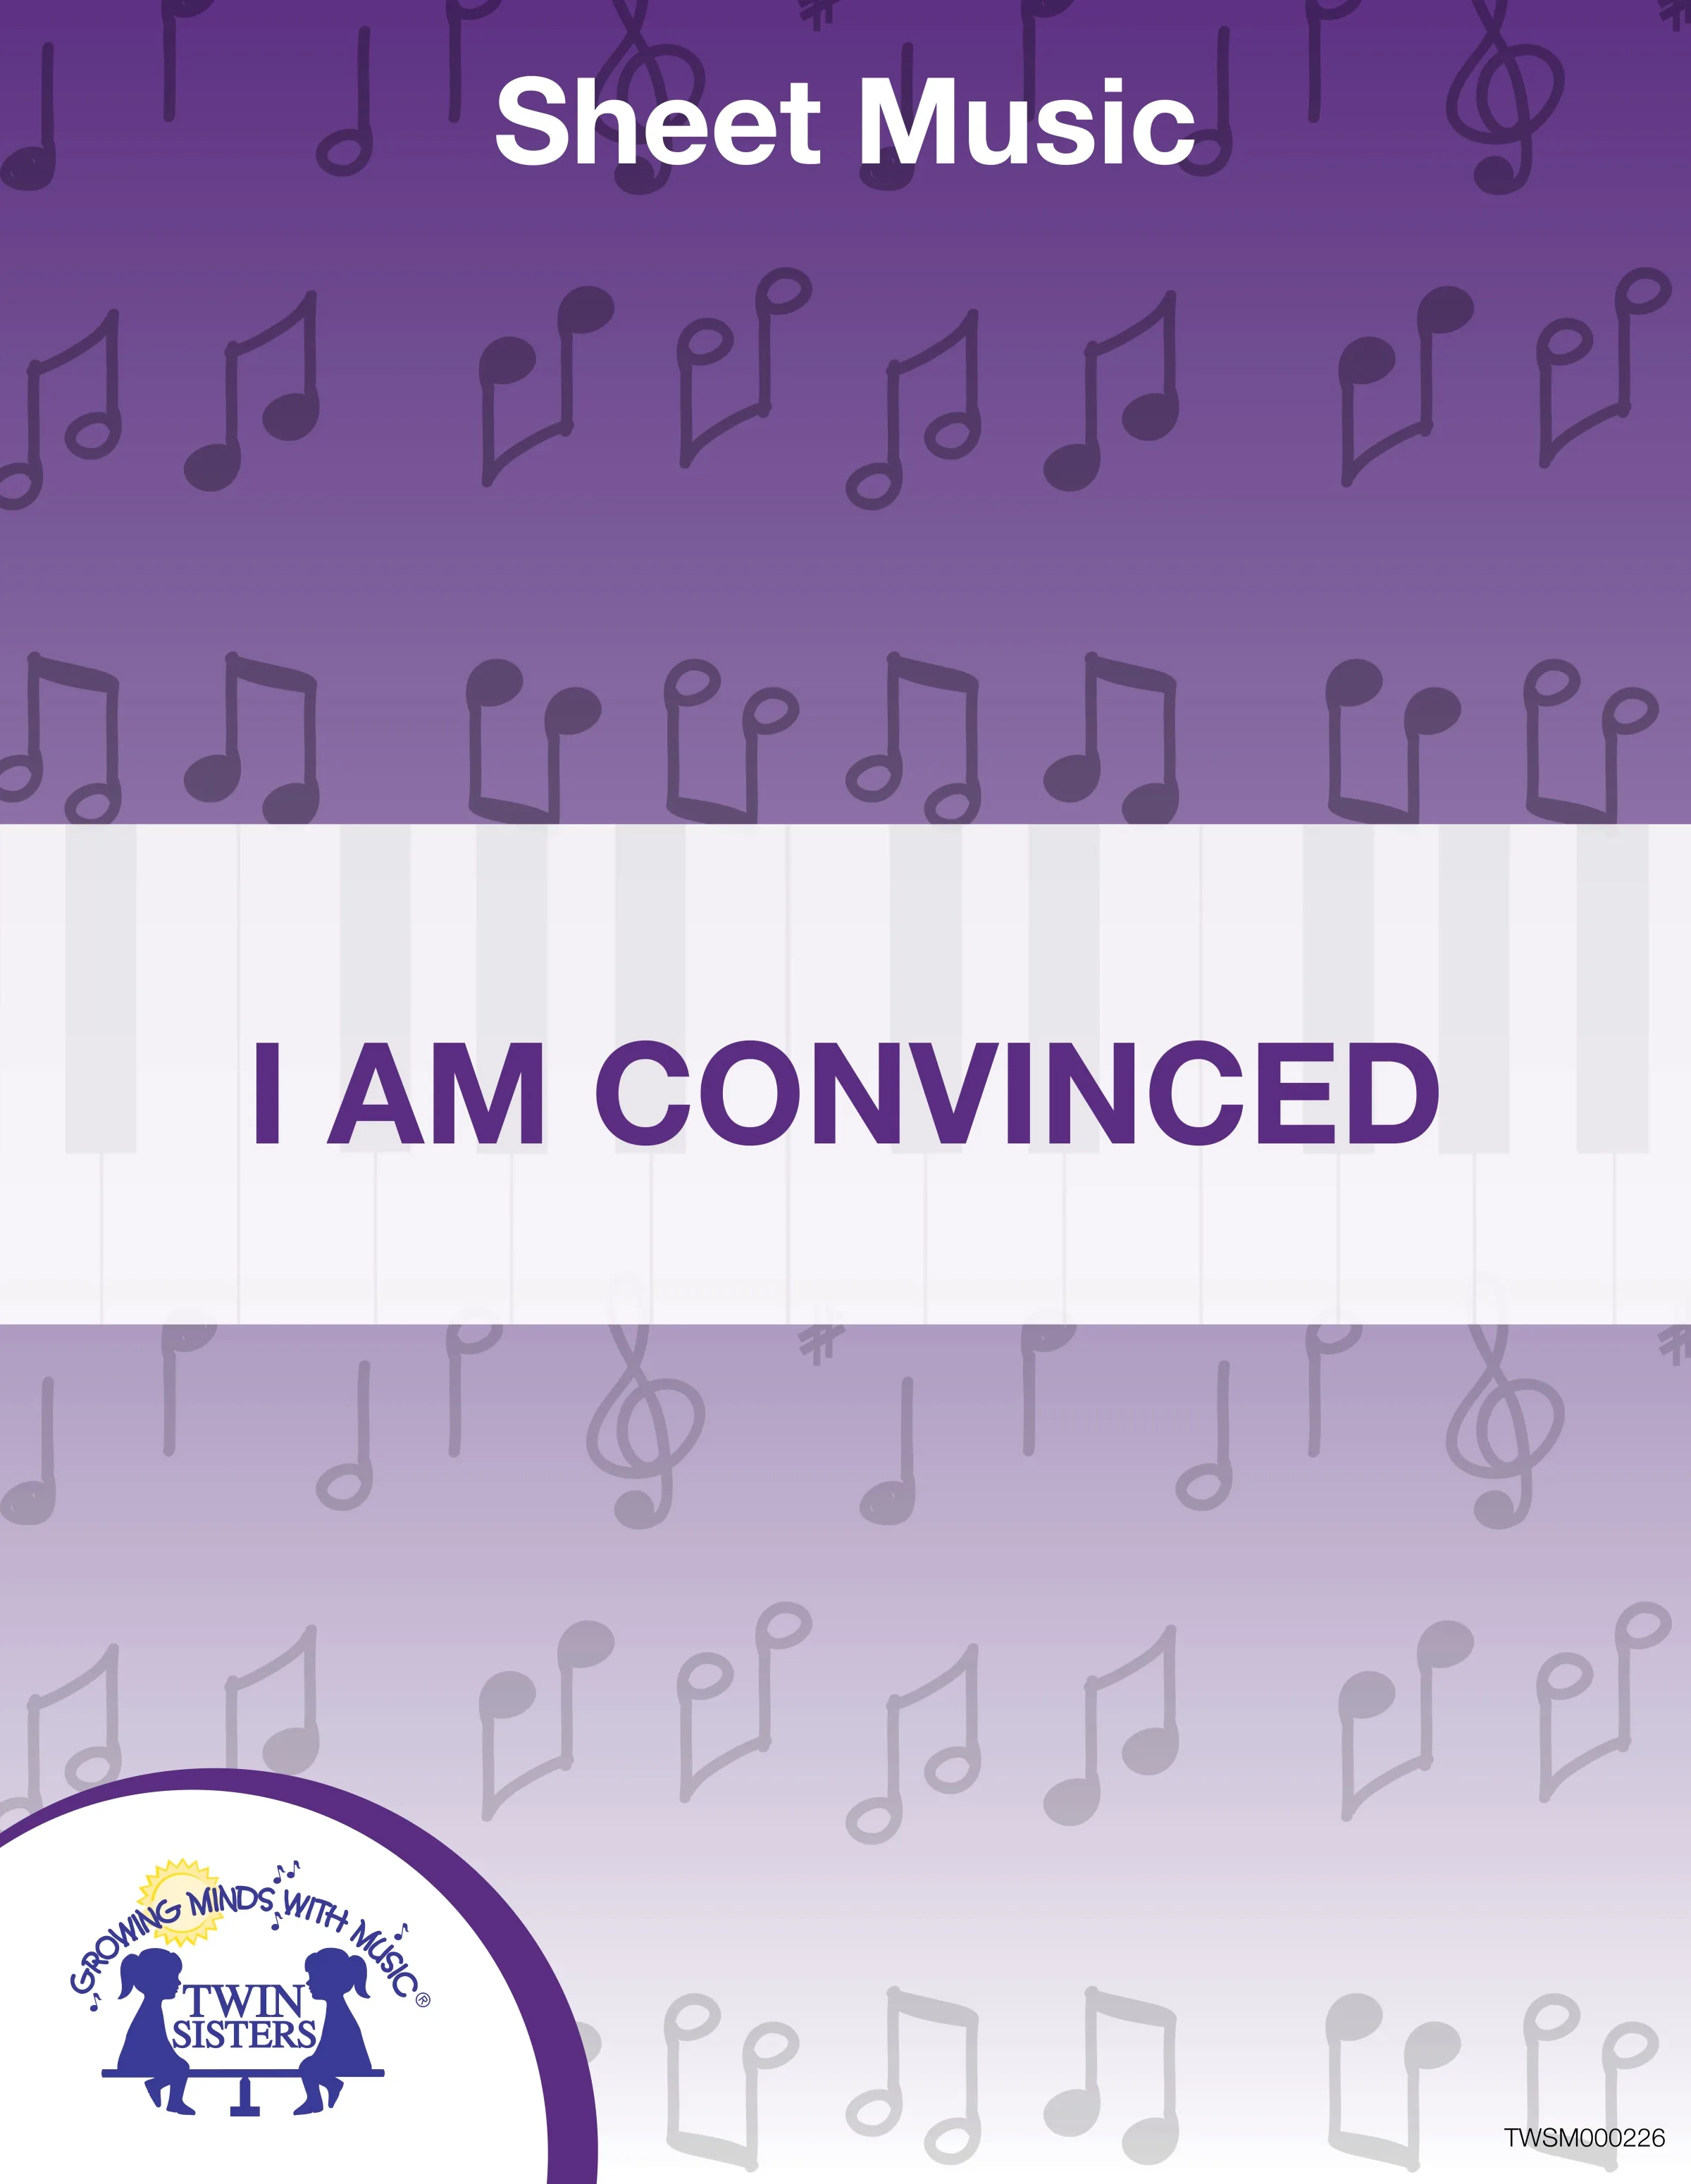 An educational teaching resource from Twin Sisters Digital Media entitled I Am Convinced Sheet Music downloadable at Teach Simple.